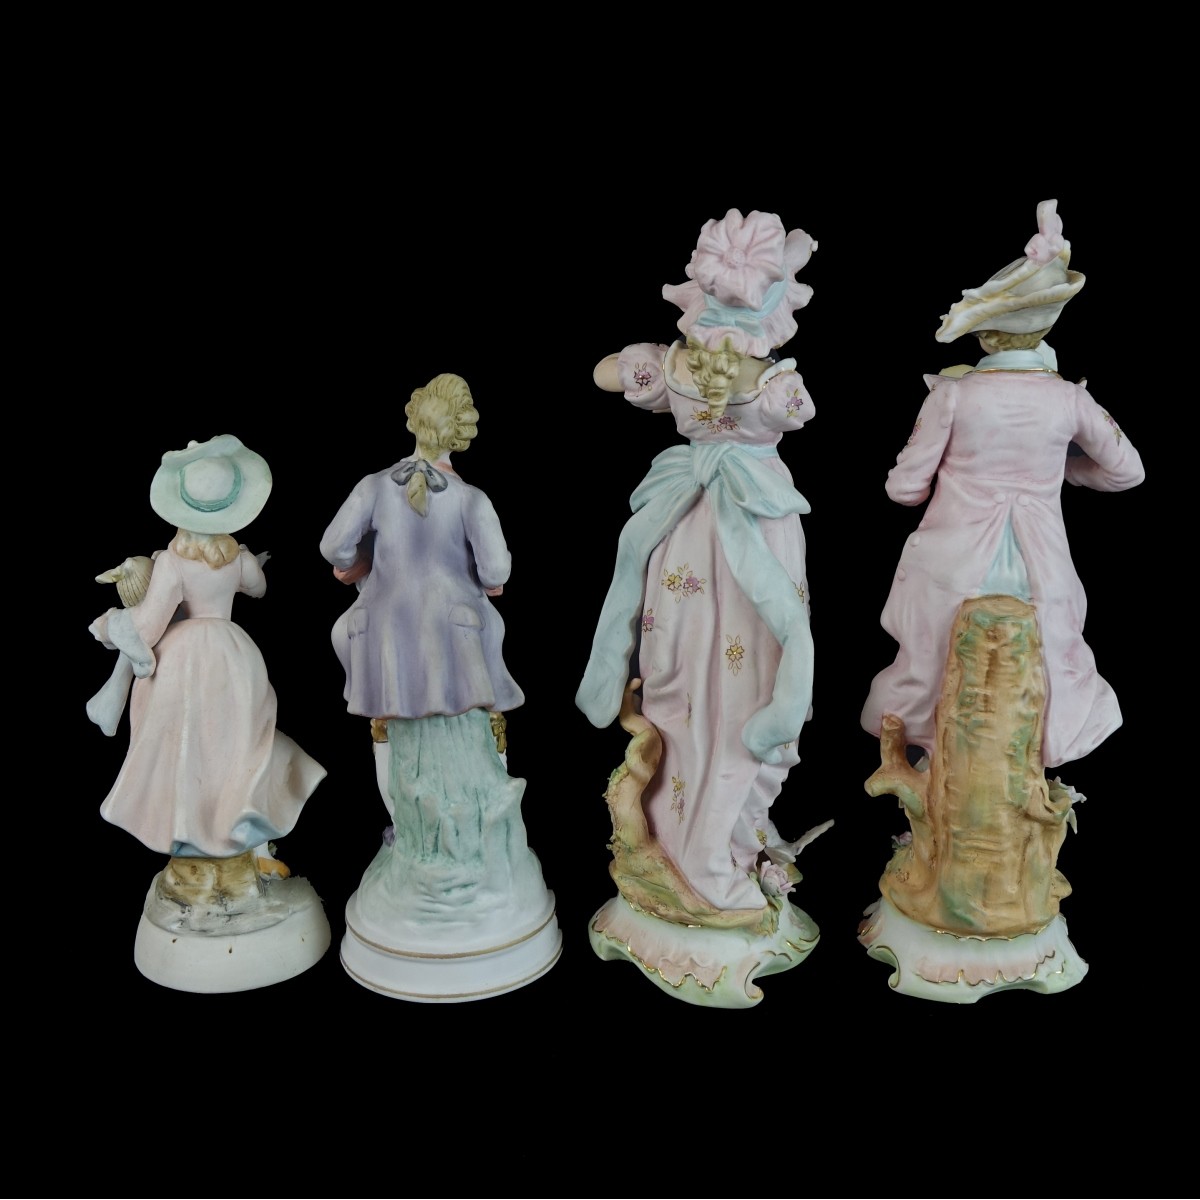 Four (4) Dresden Style Figurines